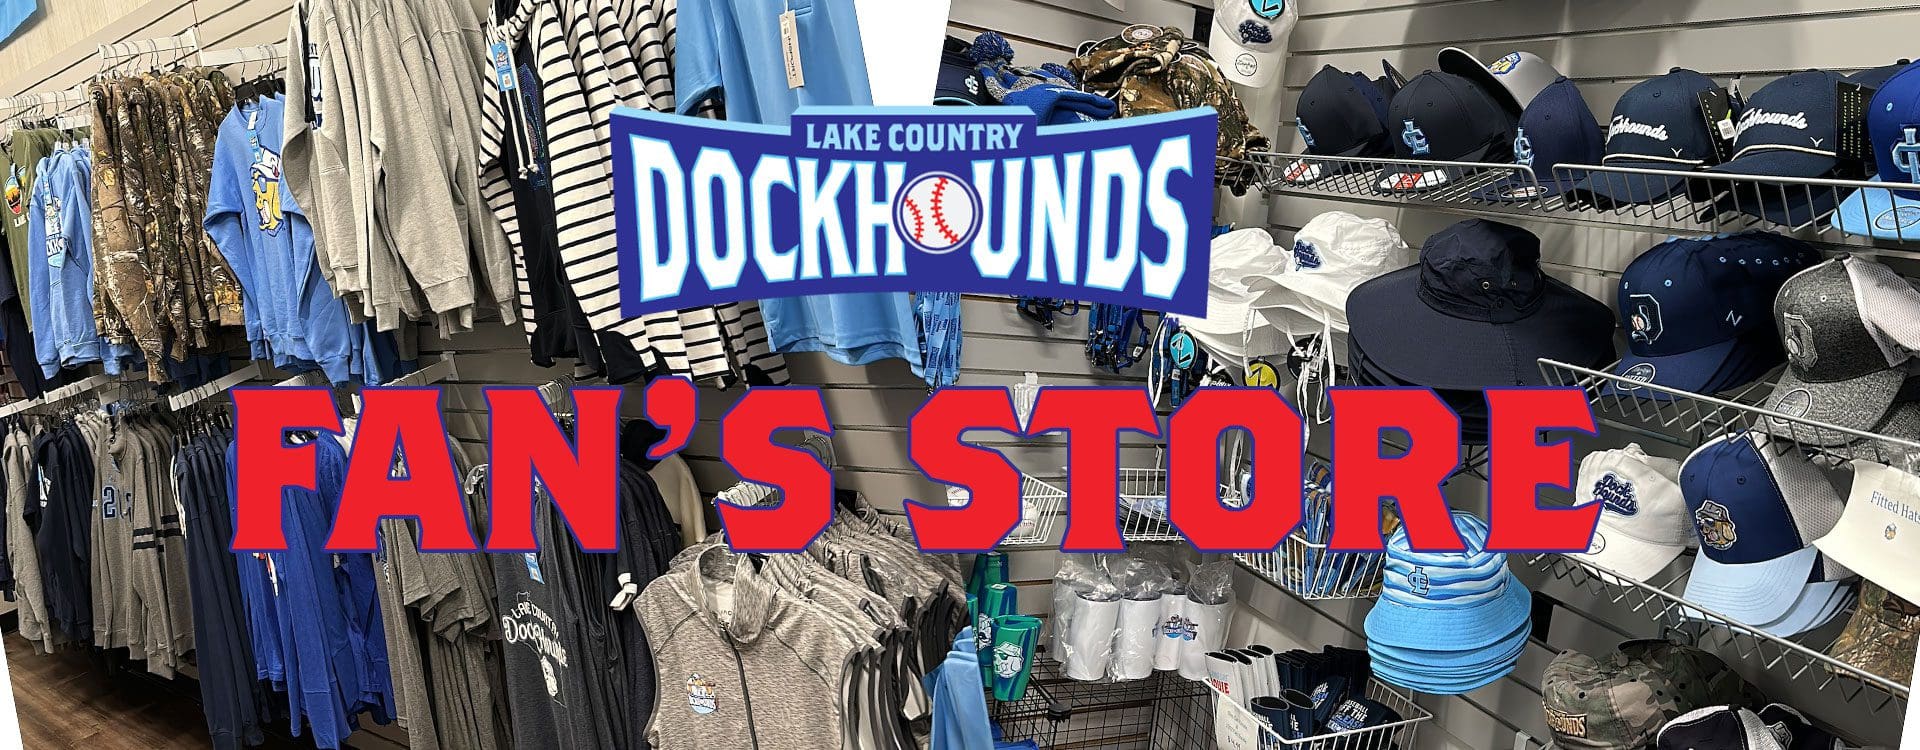 Lake Country DockHounds Fans Store